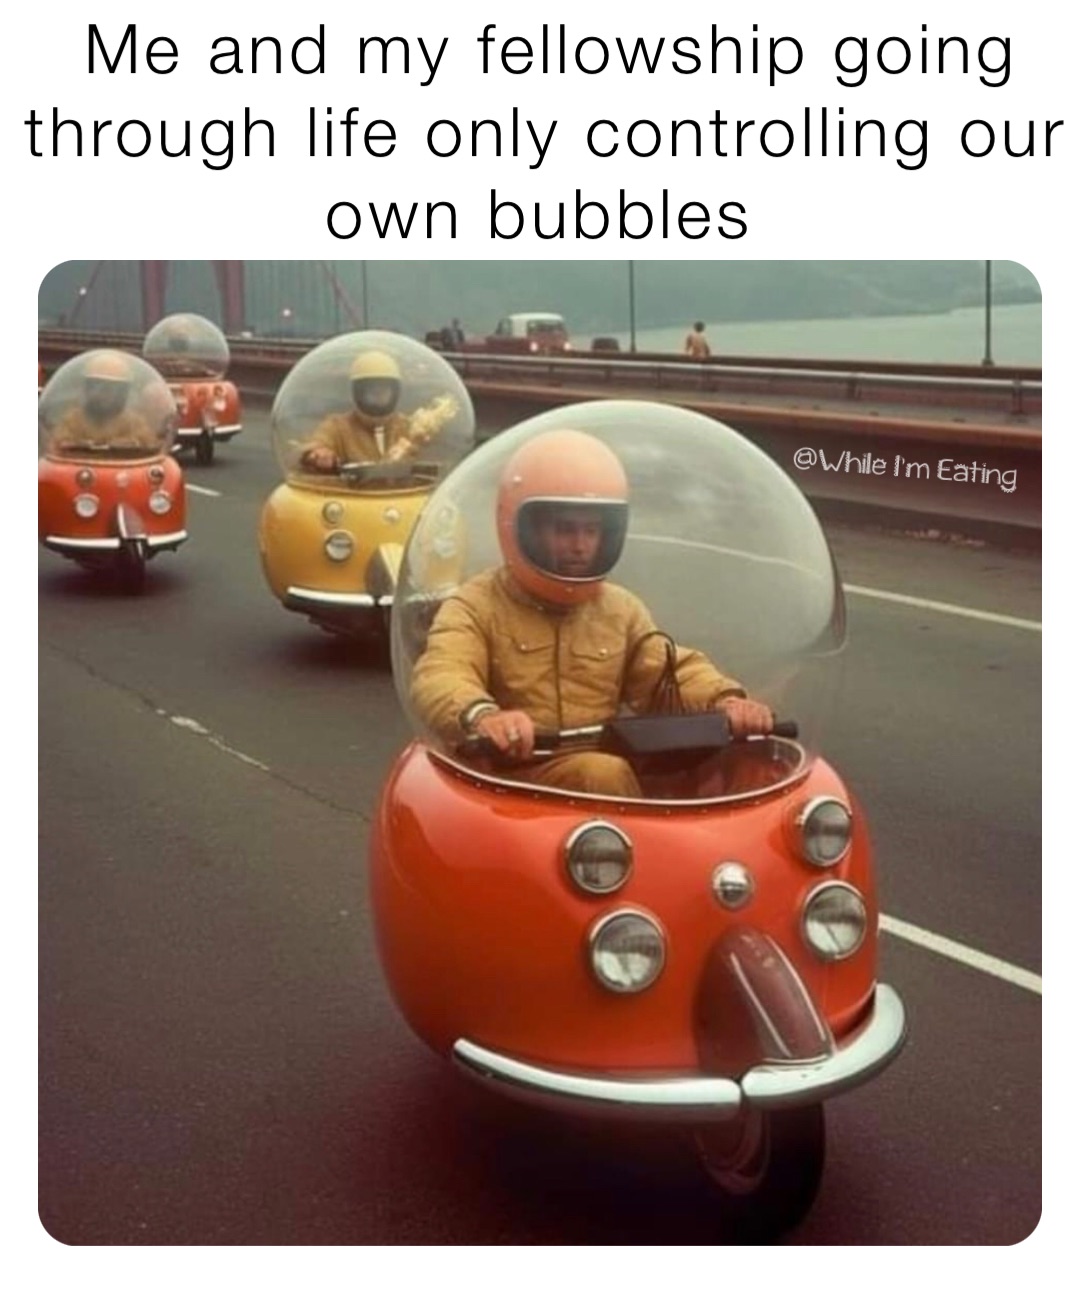 Me and my fellowship going through life only controlling our own bubbles